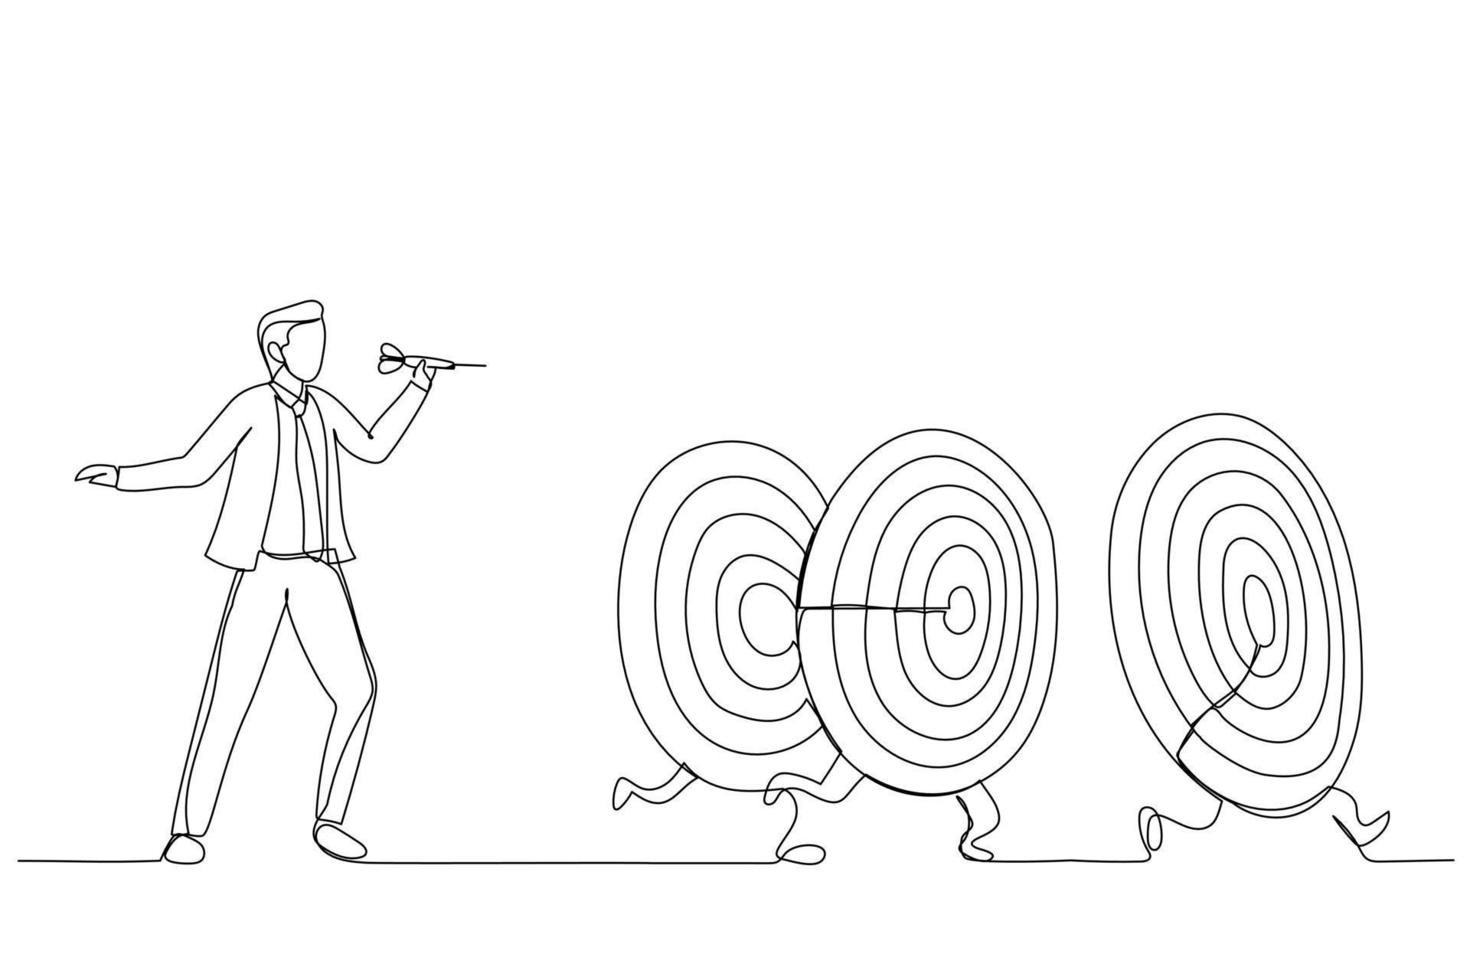 Cartoon of businessman and targets. Continuous line art style vector